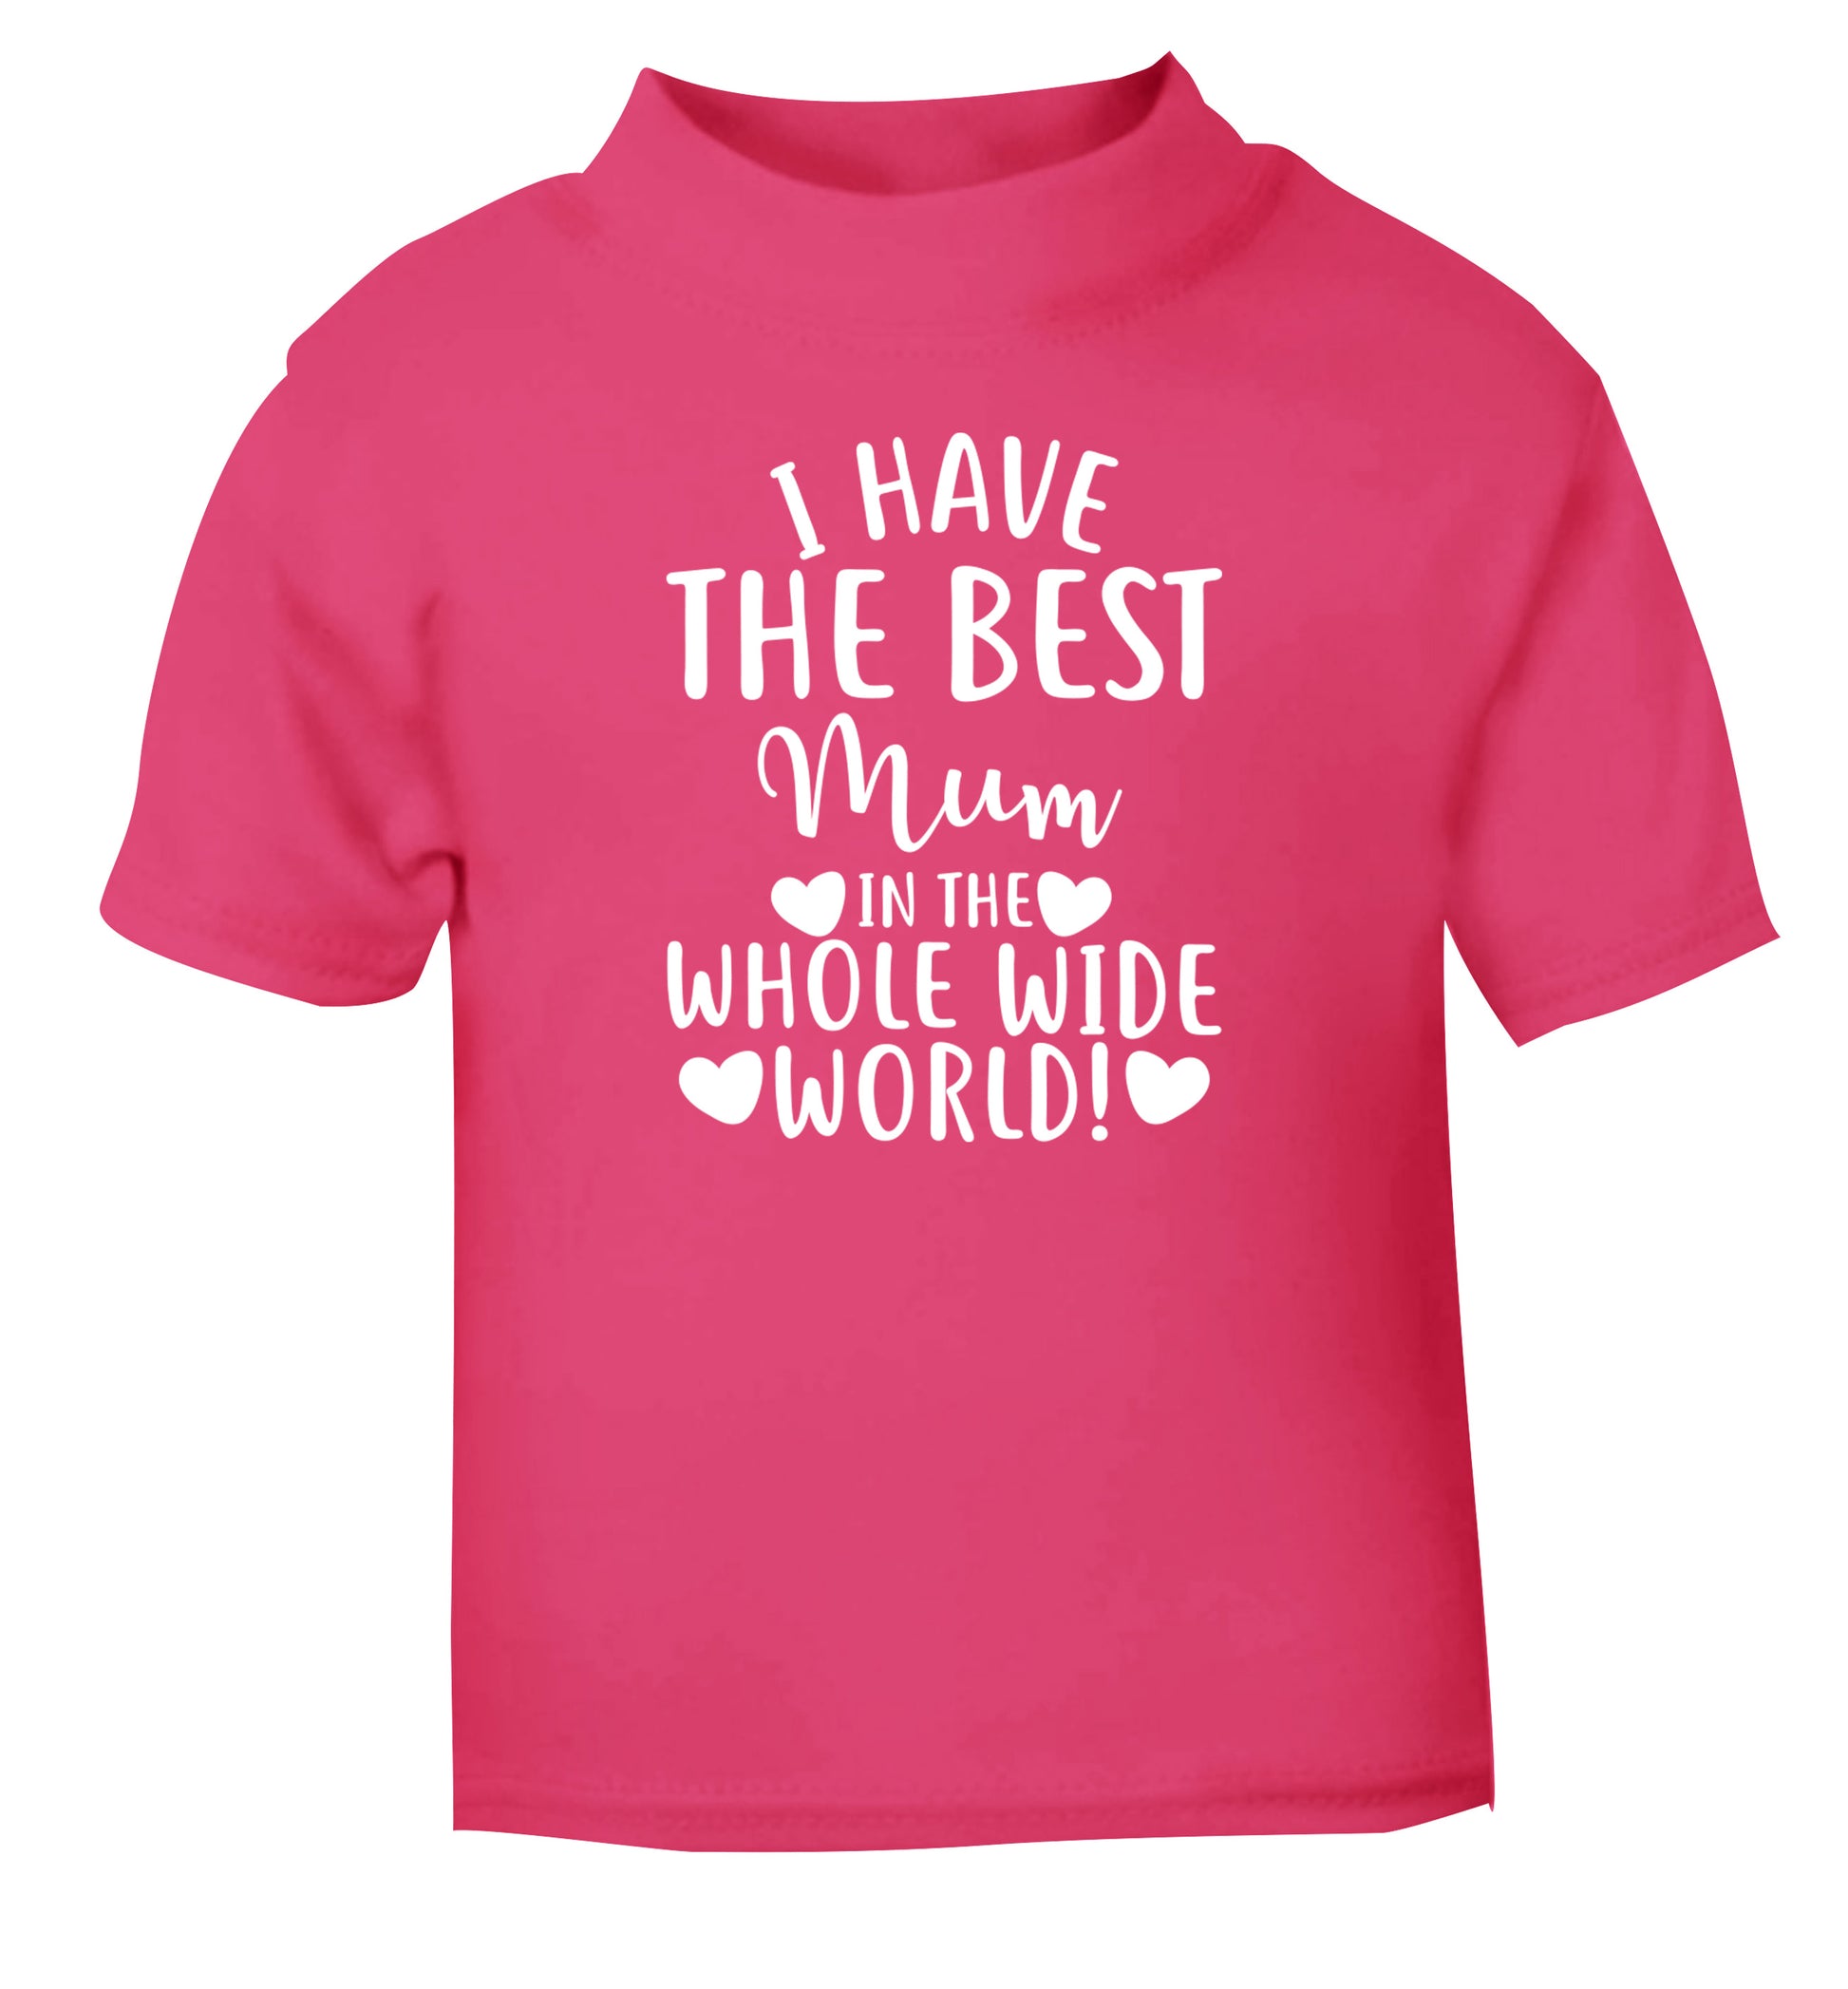 I have the best mum in the whole wide world! pink Baby Toddler Tshirt 2 Years